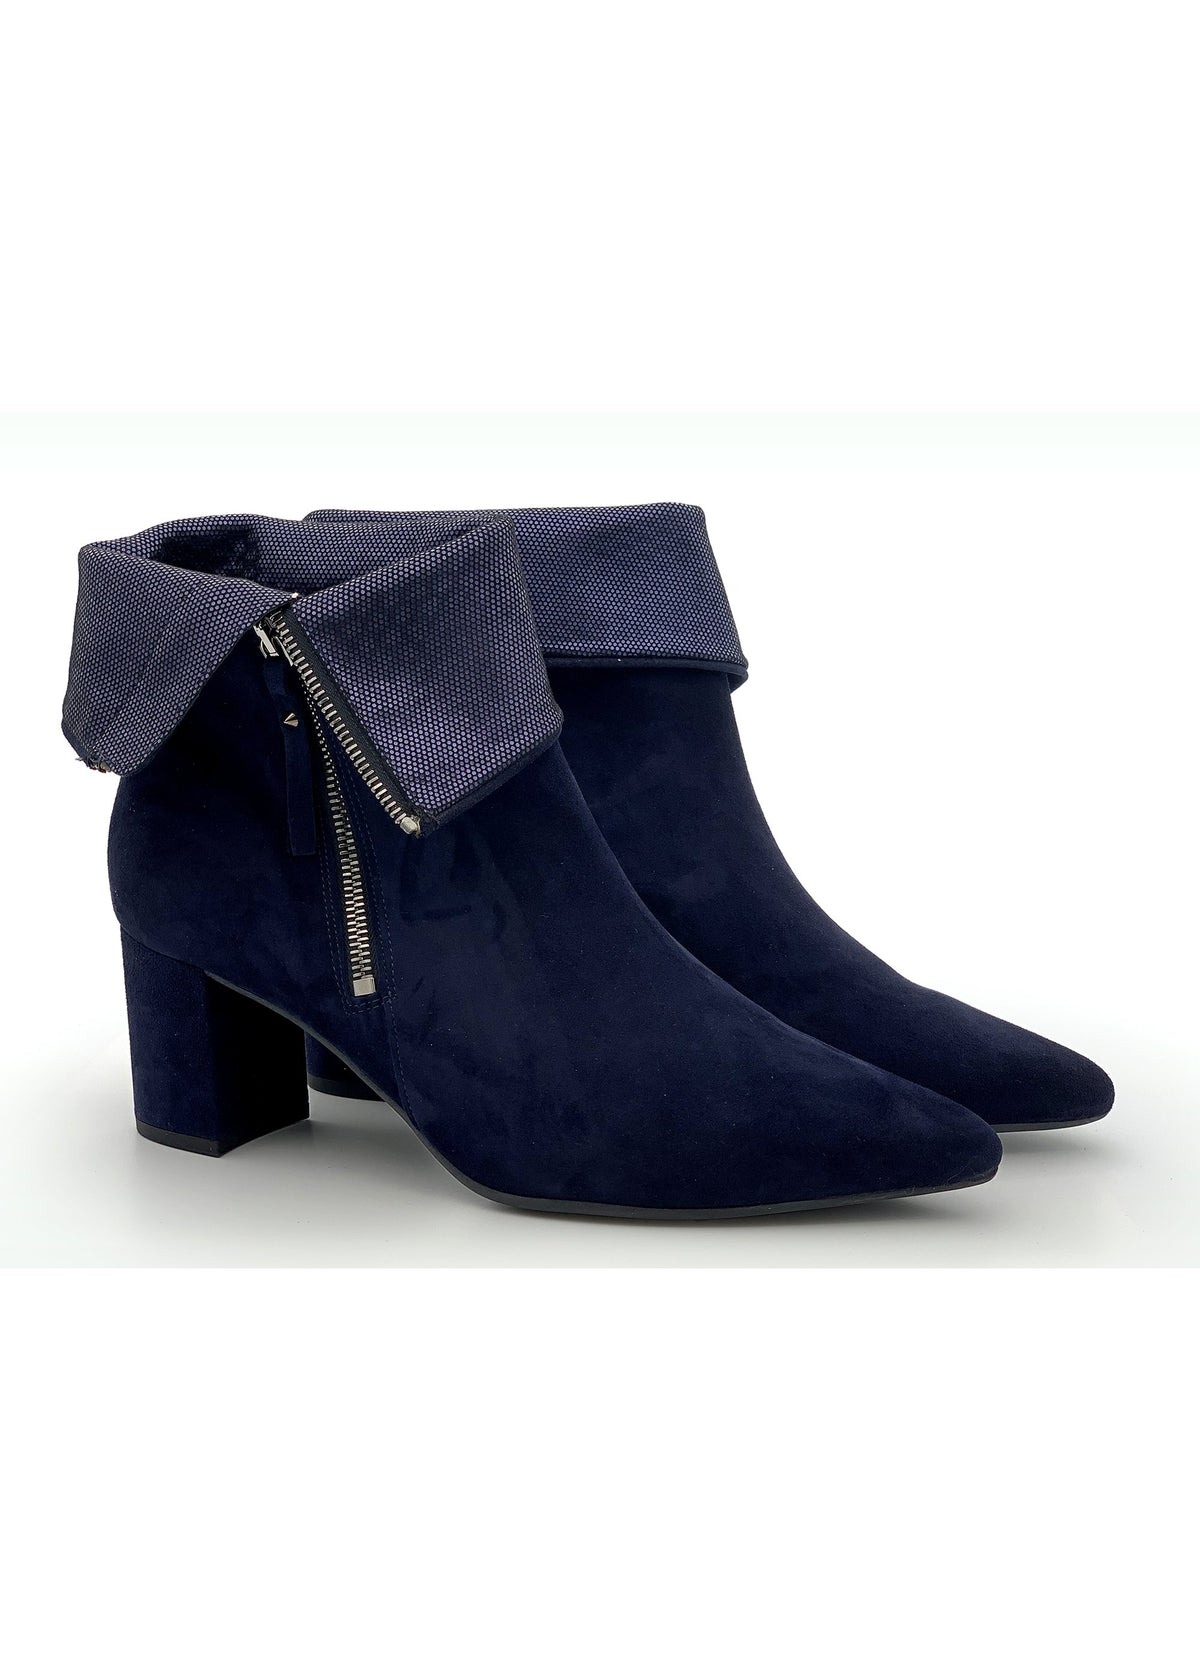 Ankle boots with stud heel - dark blue